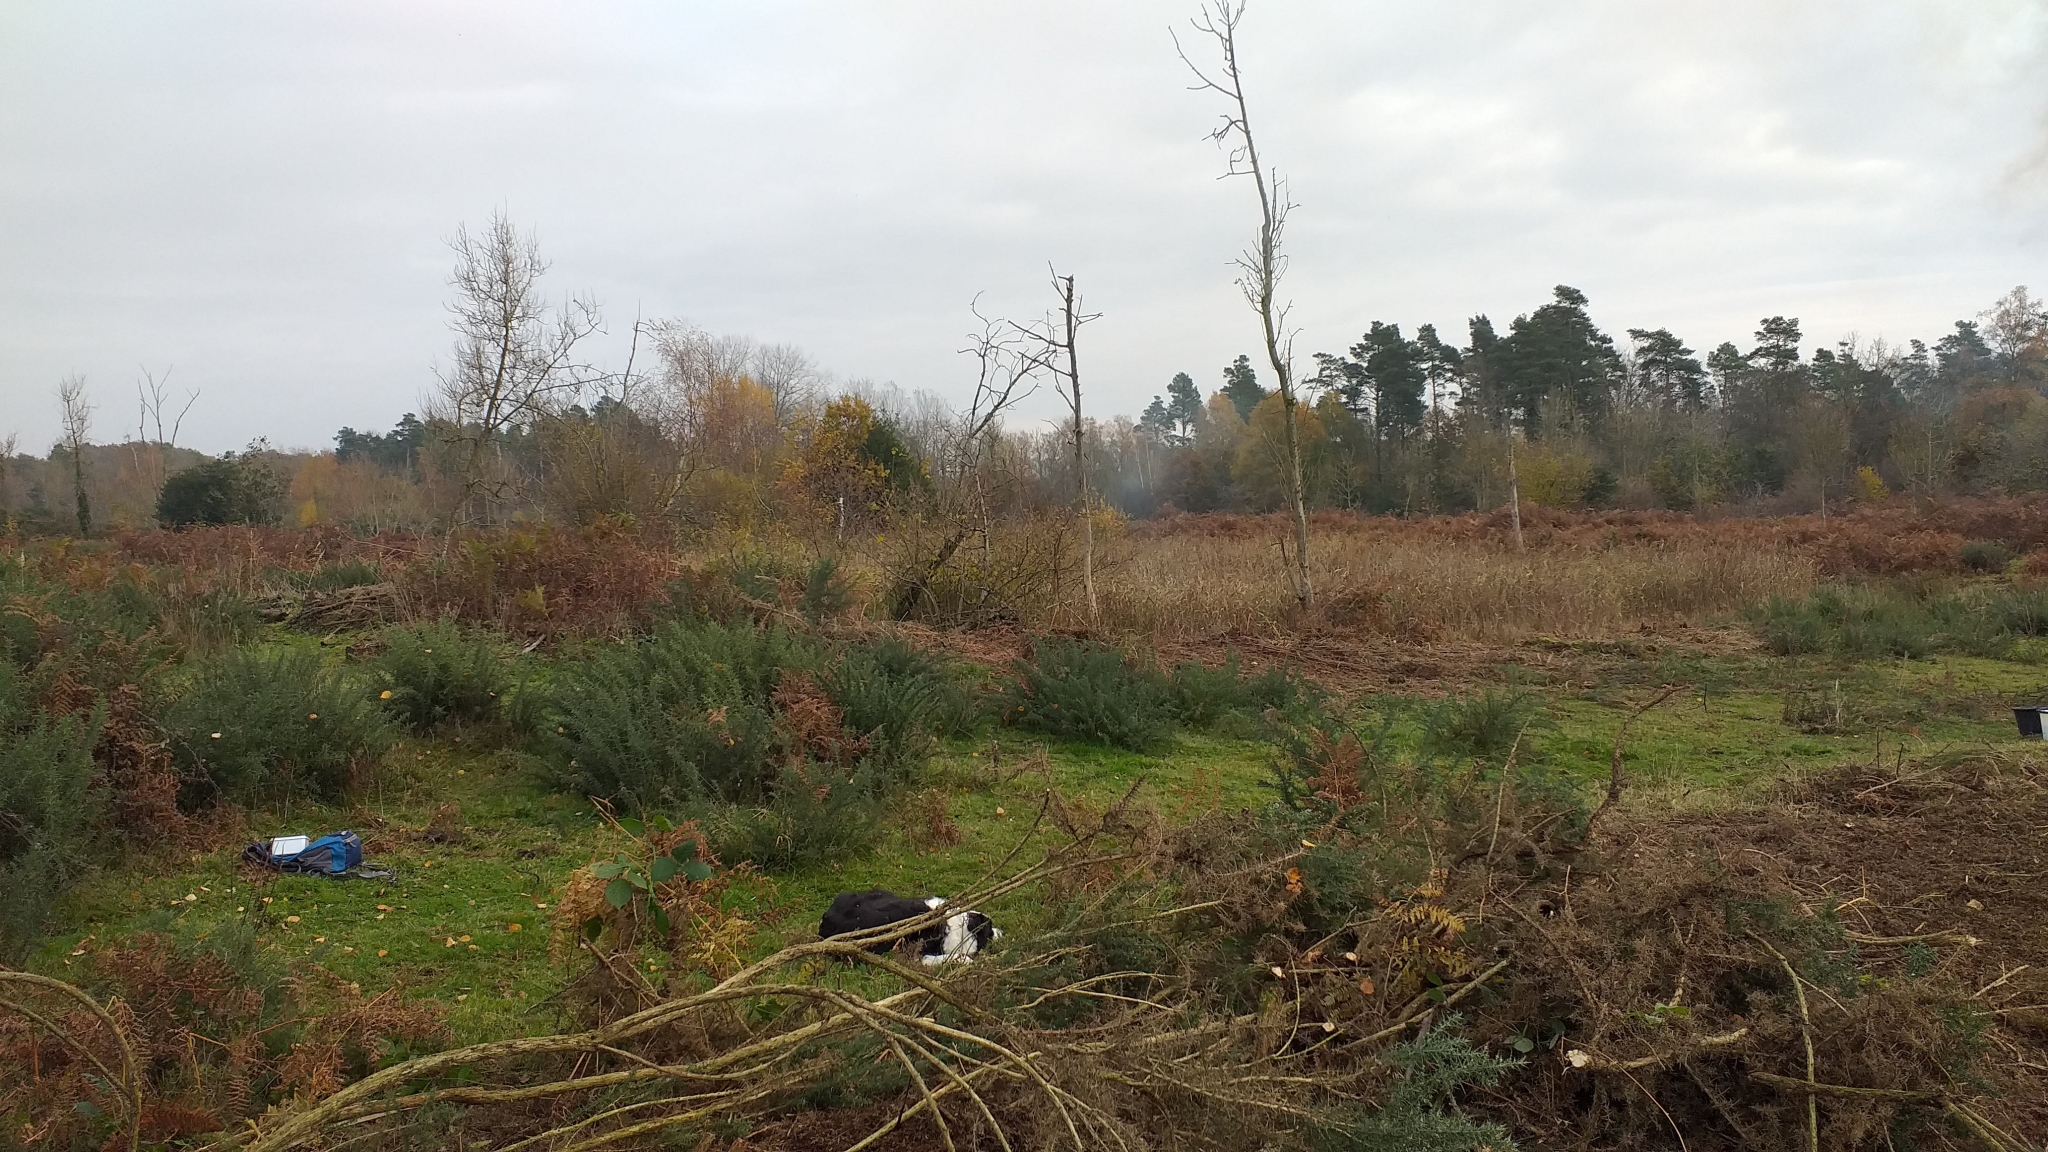 A photo from the FoTF Conservation Event - November 2019 - Gorse Clearance at Hockham Hills & Holes : A dog naps between Gorse bushes